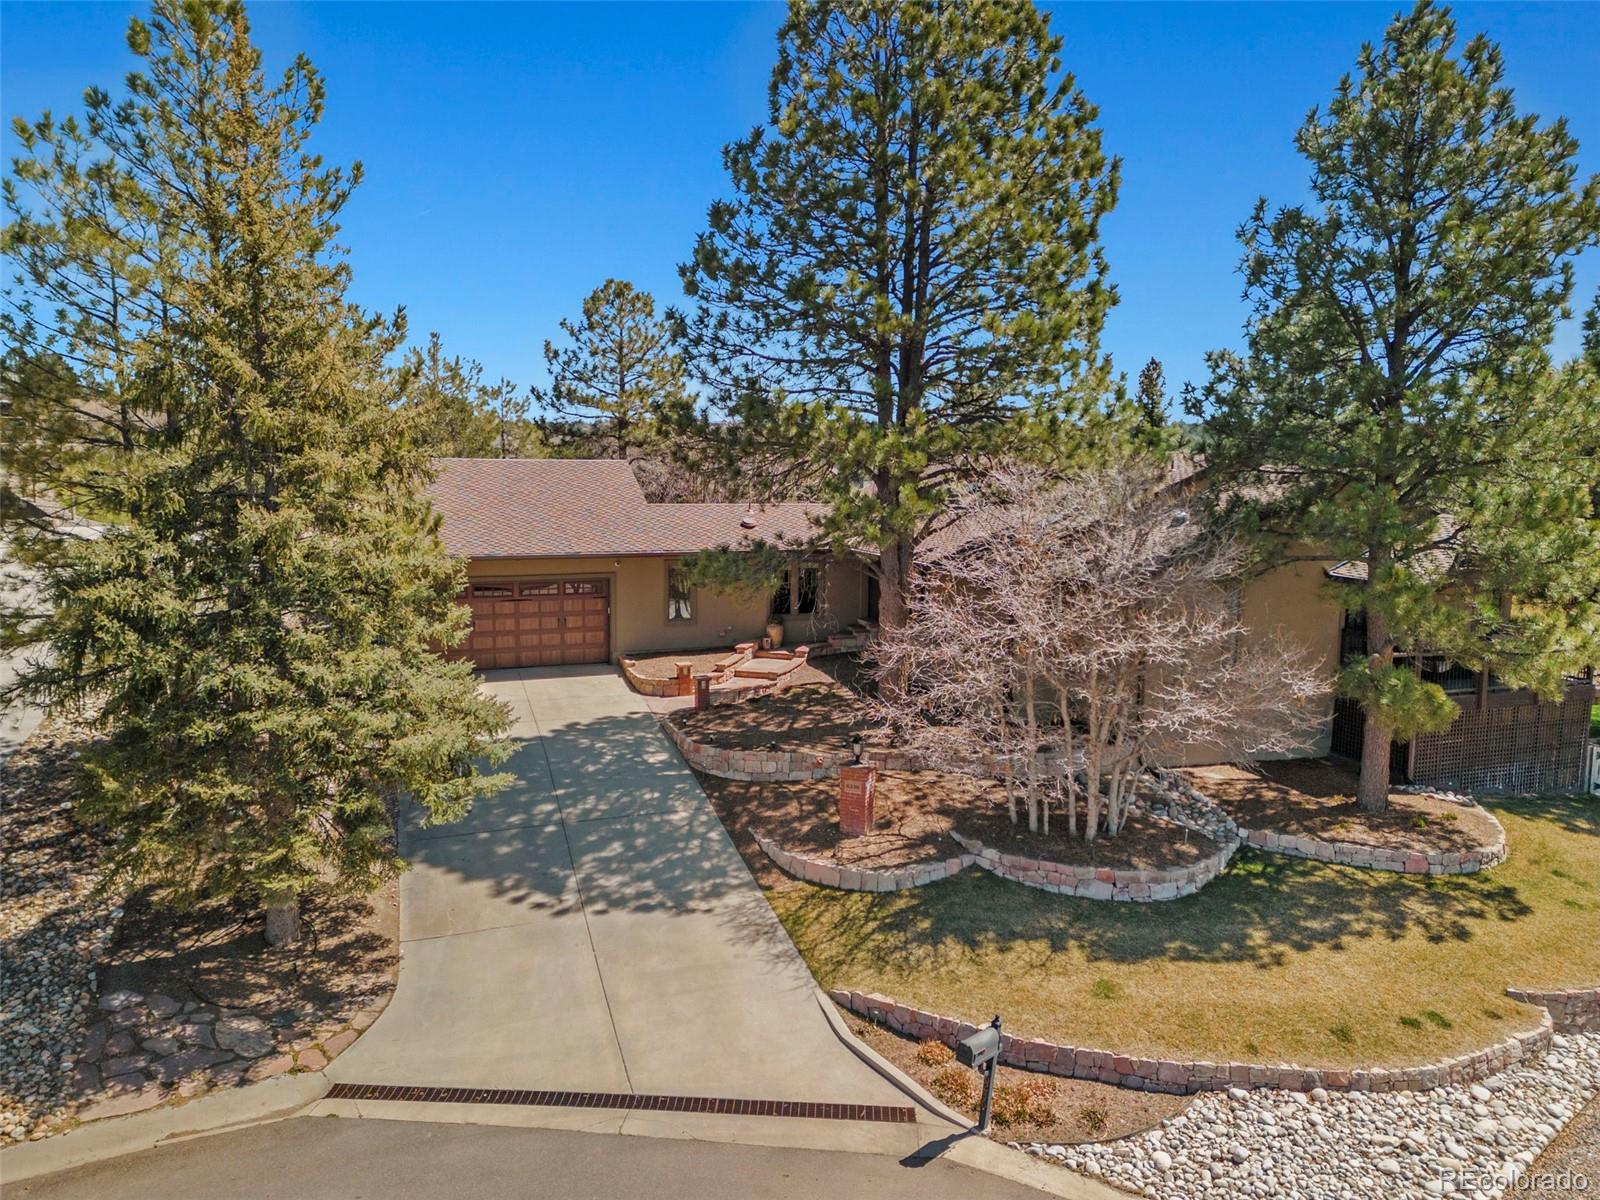 6236  lakepoint place, parker sold home. Closed on 2024-05-20 for $935,000.